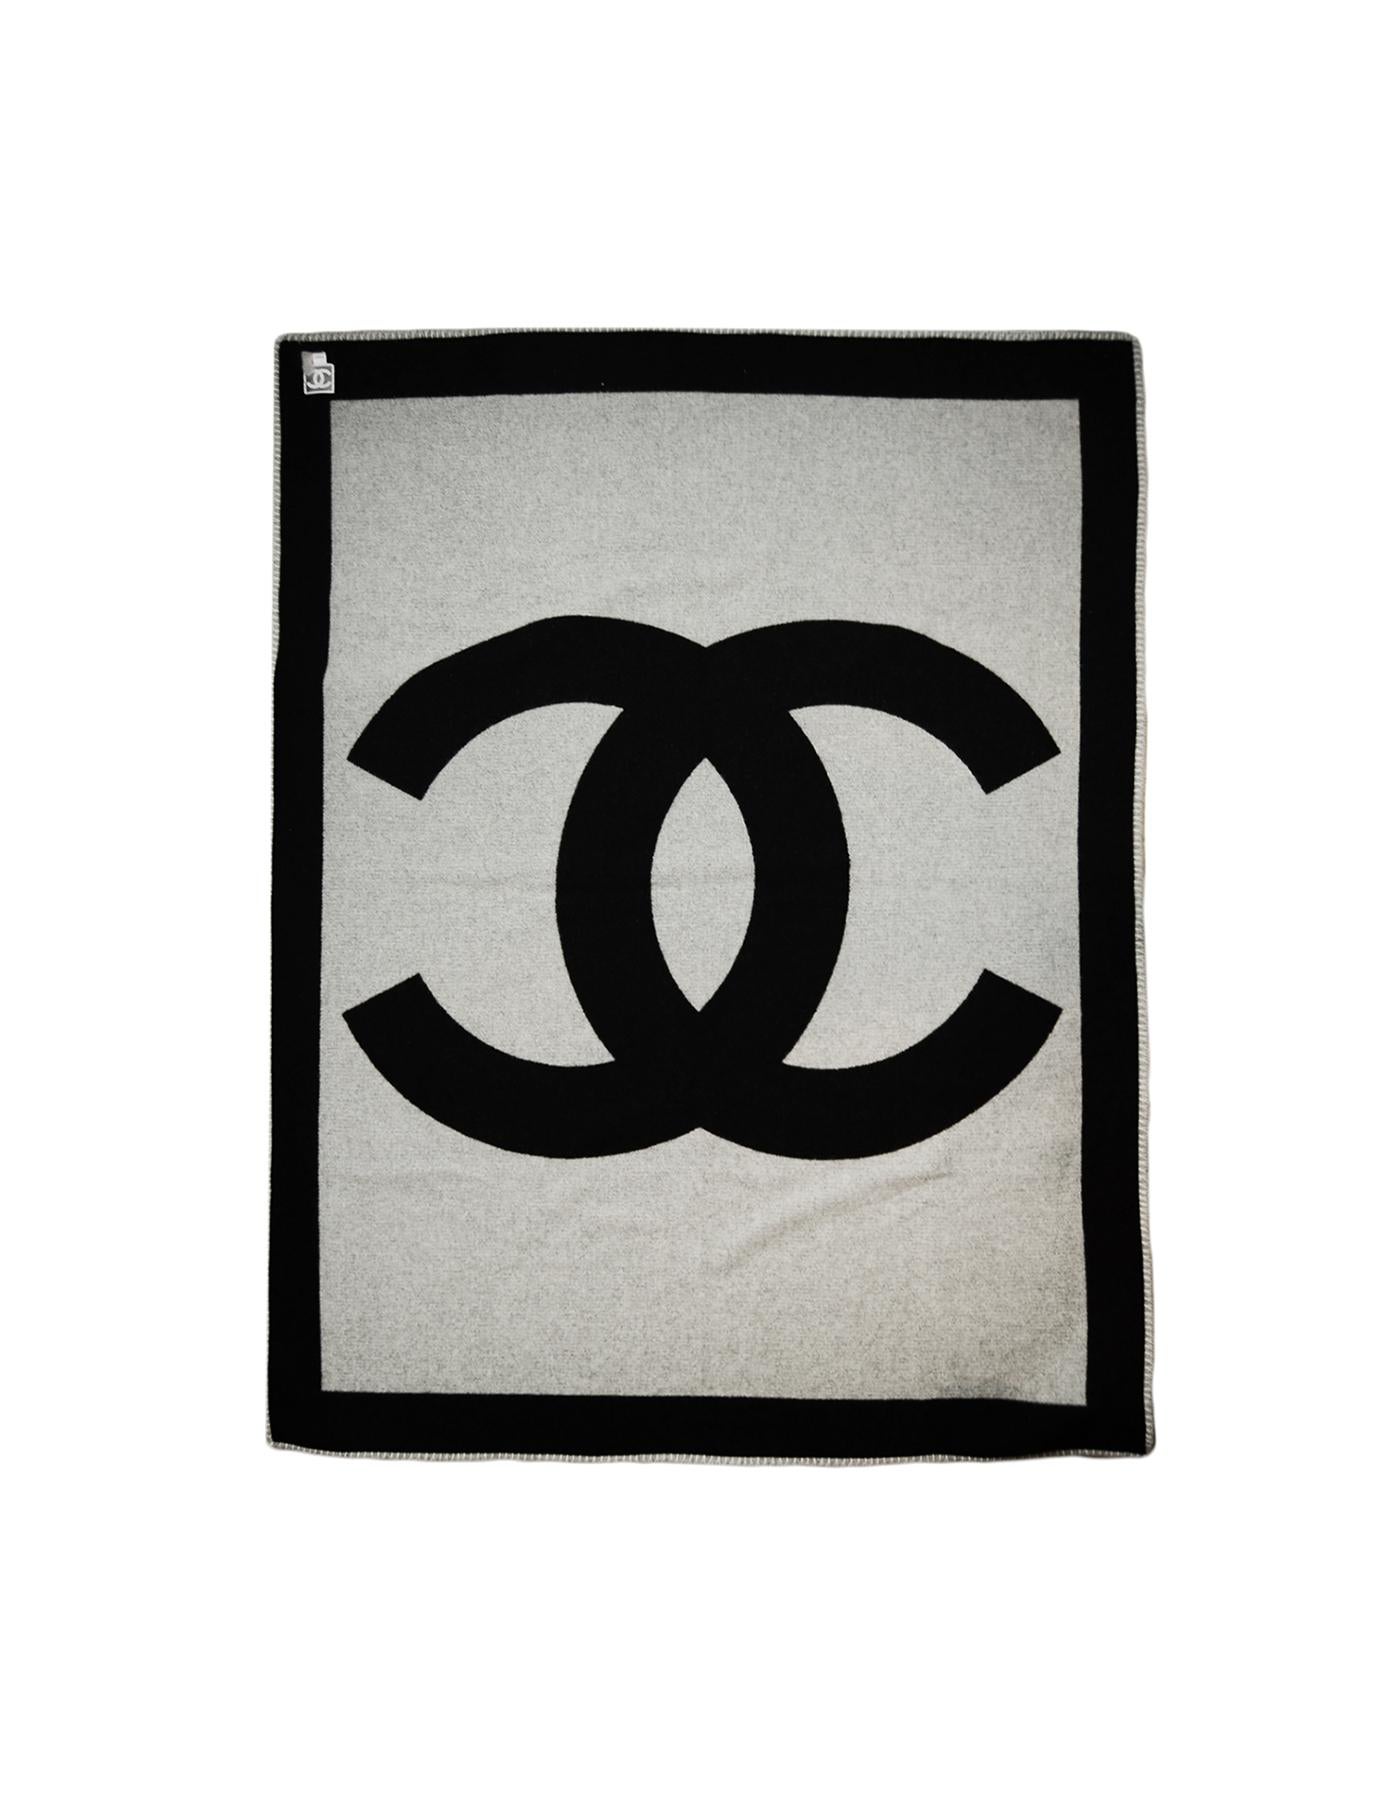 Chanel Black Grey Merino Wool & Cashmere CC Throw Blanket

Made In: Scotland 
Color: Black, Grey
Materials: 90% Wool, 10% Cashmere
Overall Condition: Excellent pre-owned condition
Includes: Dustbag

Measurements:  
72